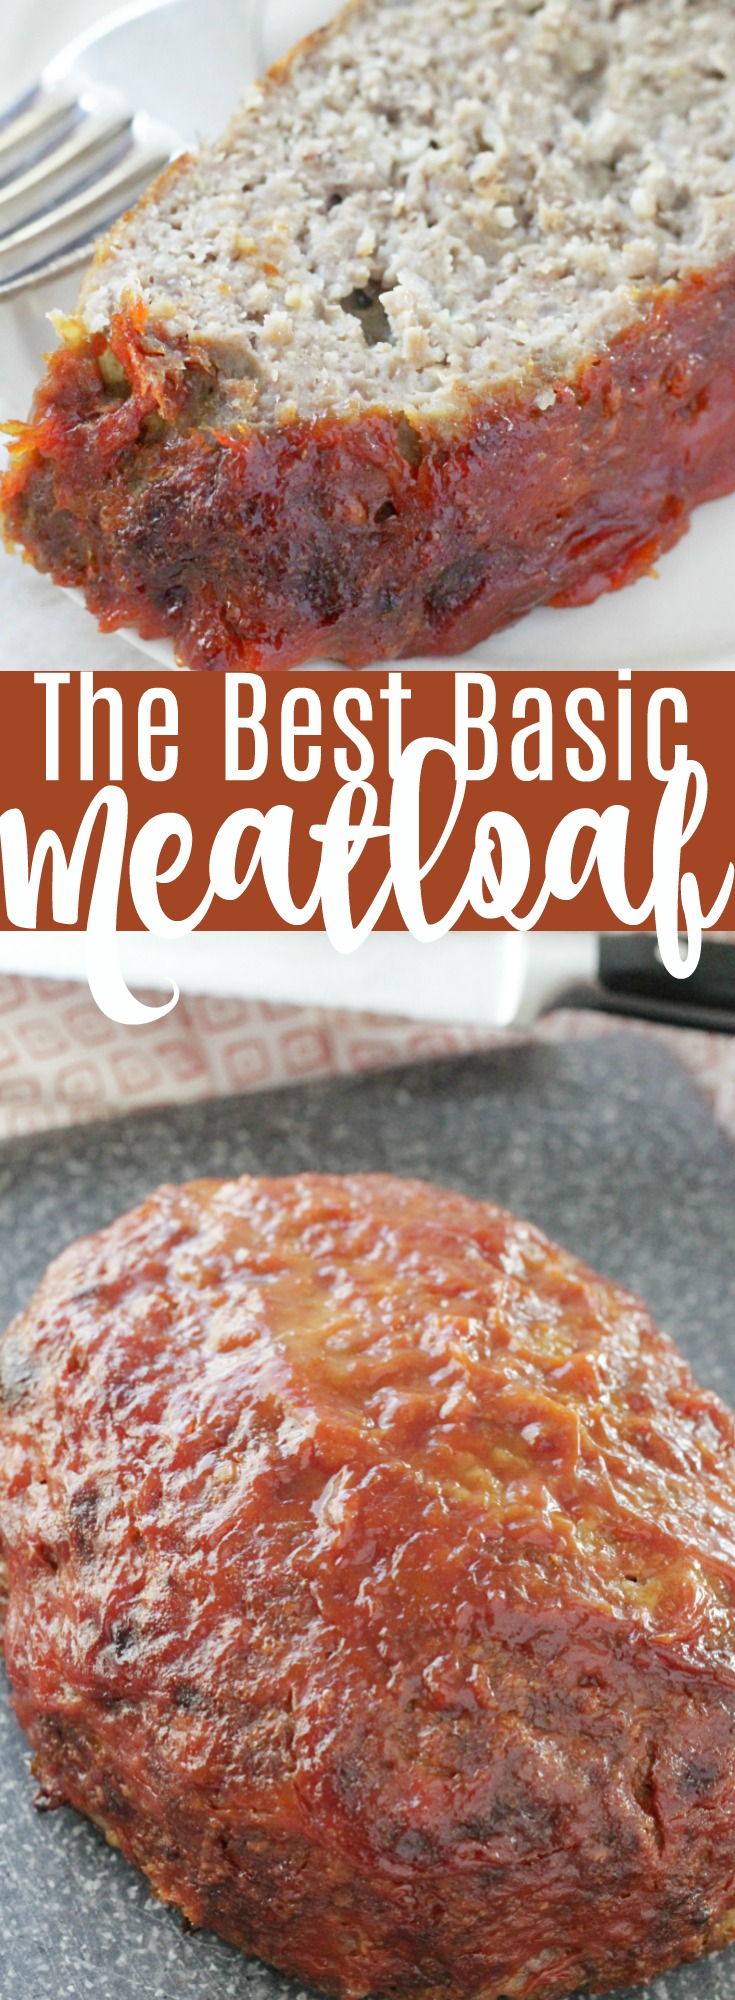 The Best Basic Meatloaf Recipe - simple family dinner - Foodtastic Mom